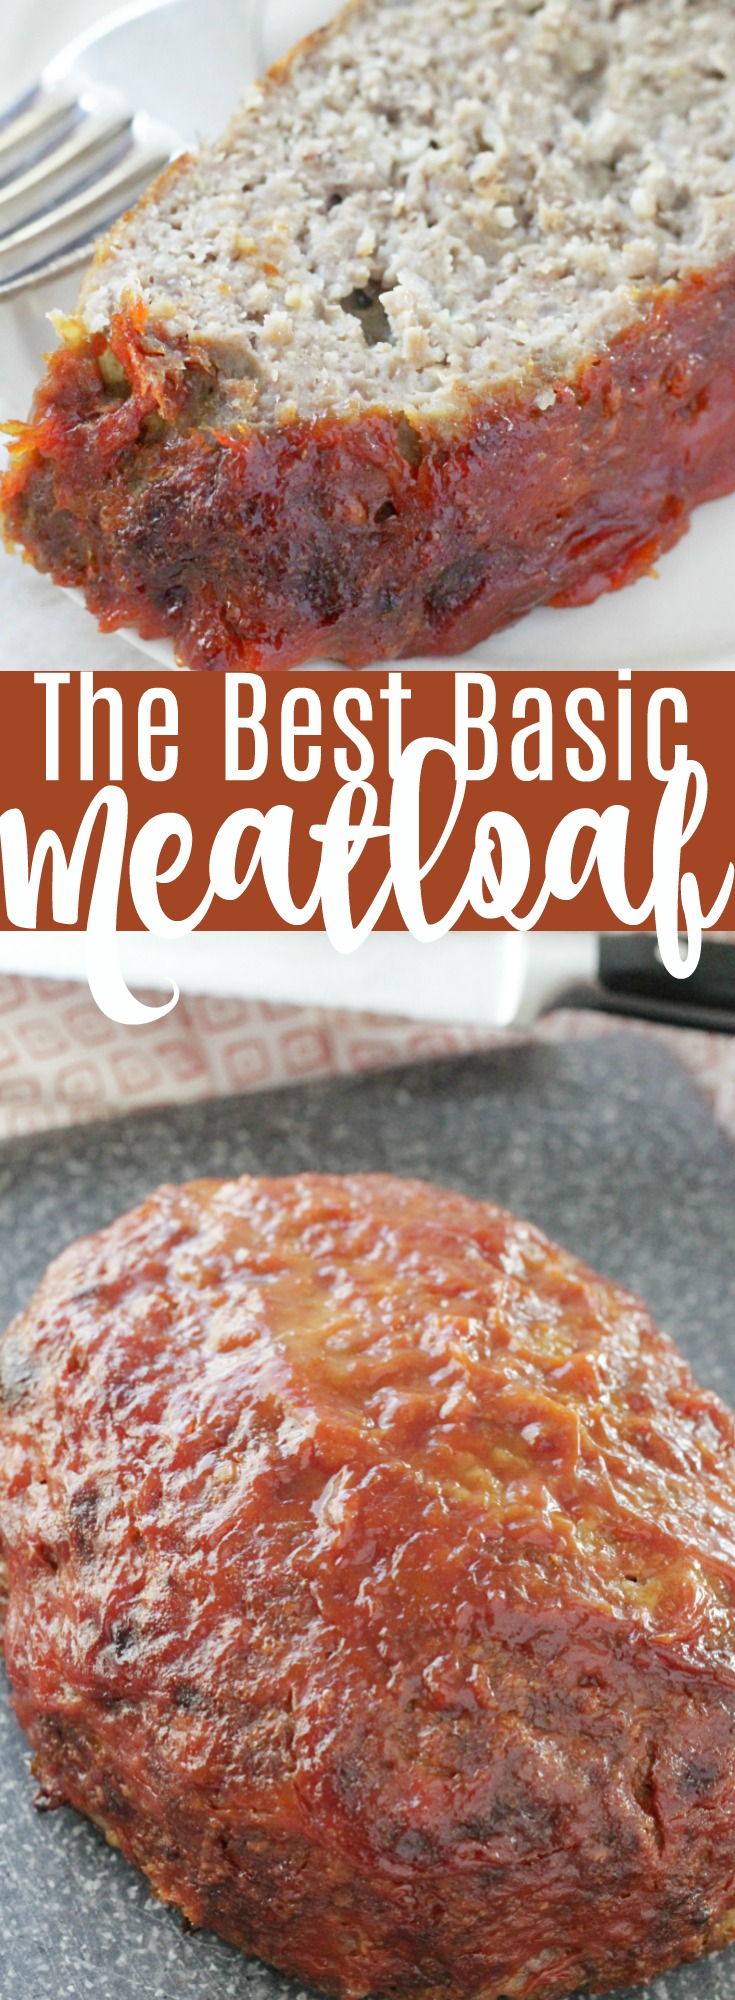 The Best Basic Meatloaf Recipe - simple family dinner - Foodtastic Mom